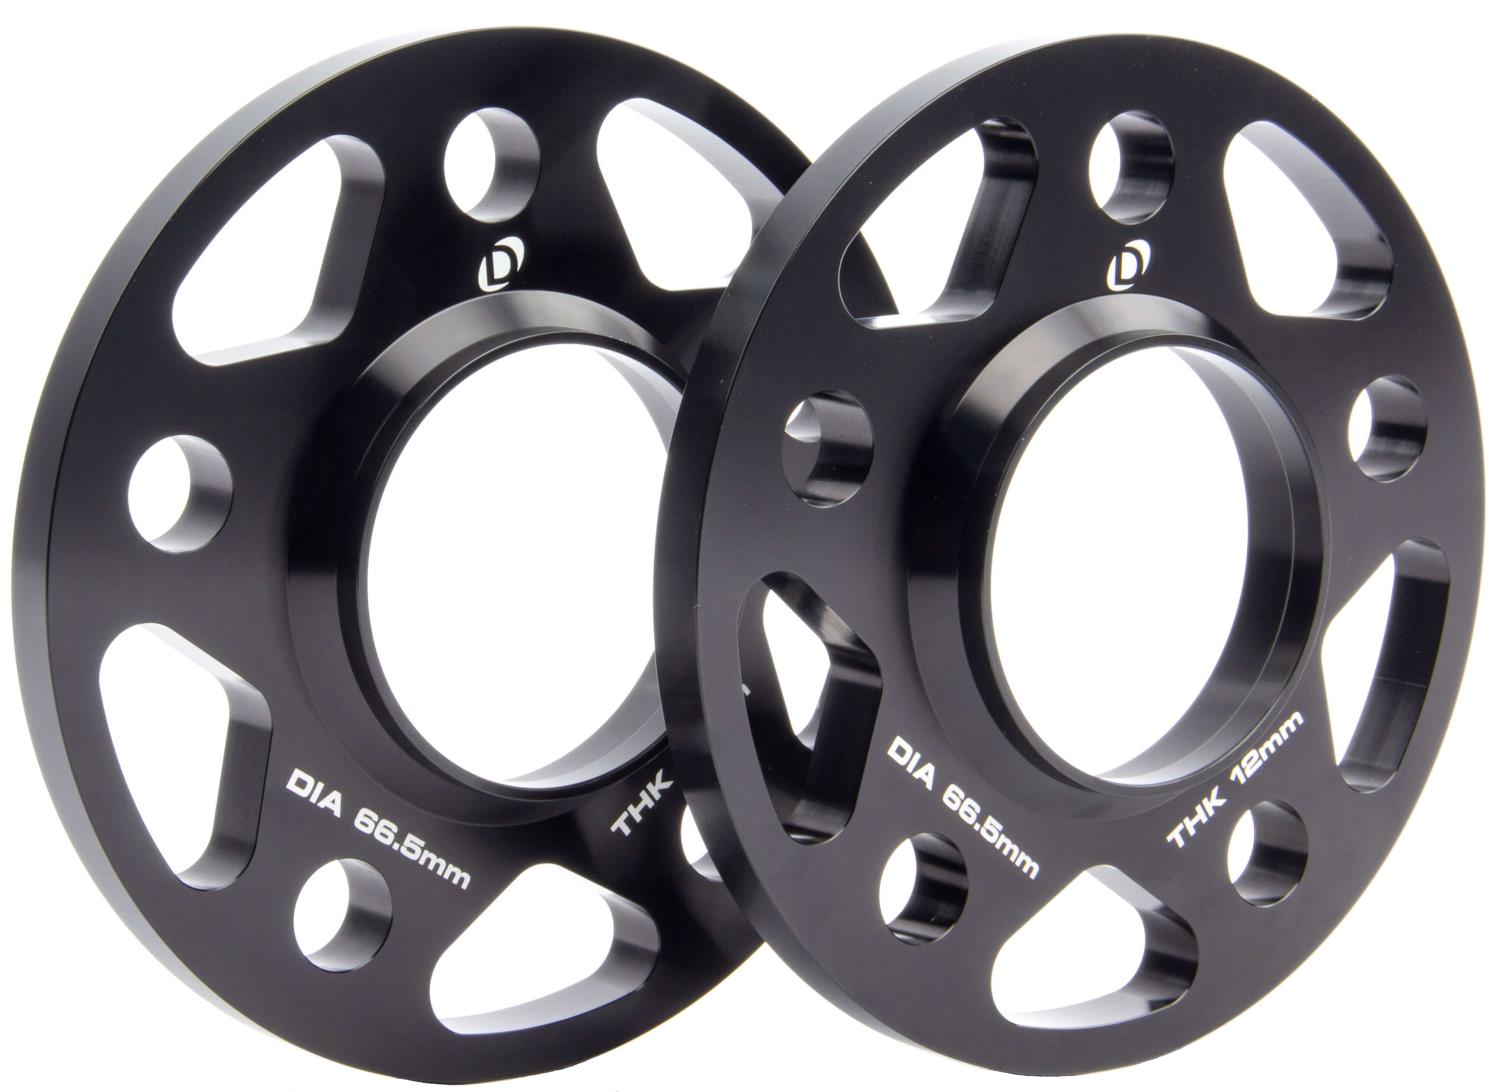 Machined Aluminum Wheel Spacers [12 mm Thick] for